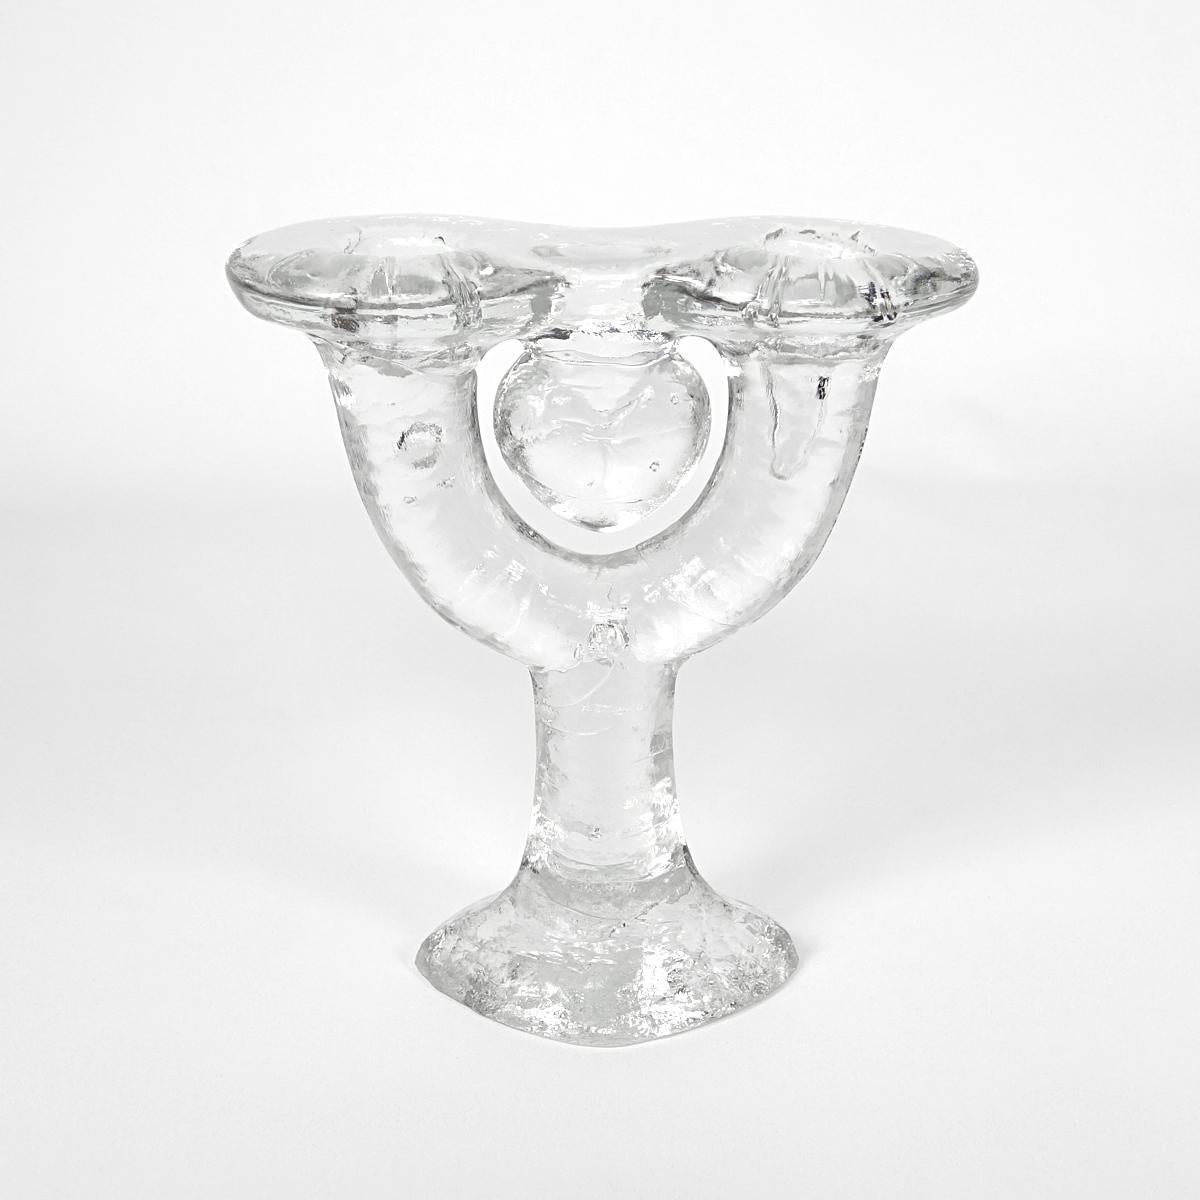 This iced glass candlestick indeed seems to be made out of ice. The bubbles and irregularities in the glass are part of the design and ensure a natural authentic look.
Once filled with virgin white candles a true gem for your set table.